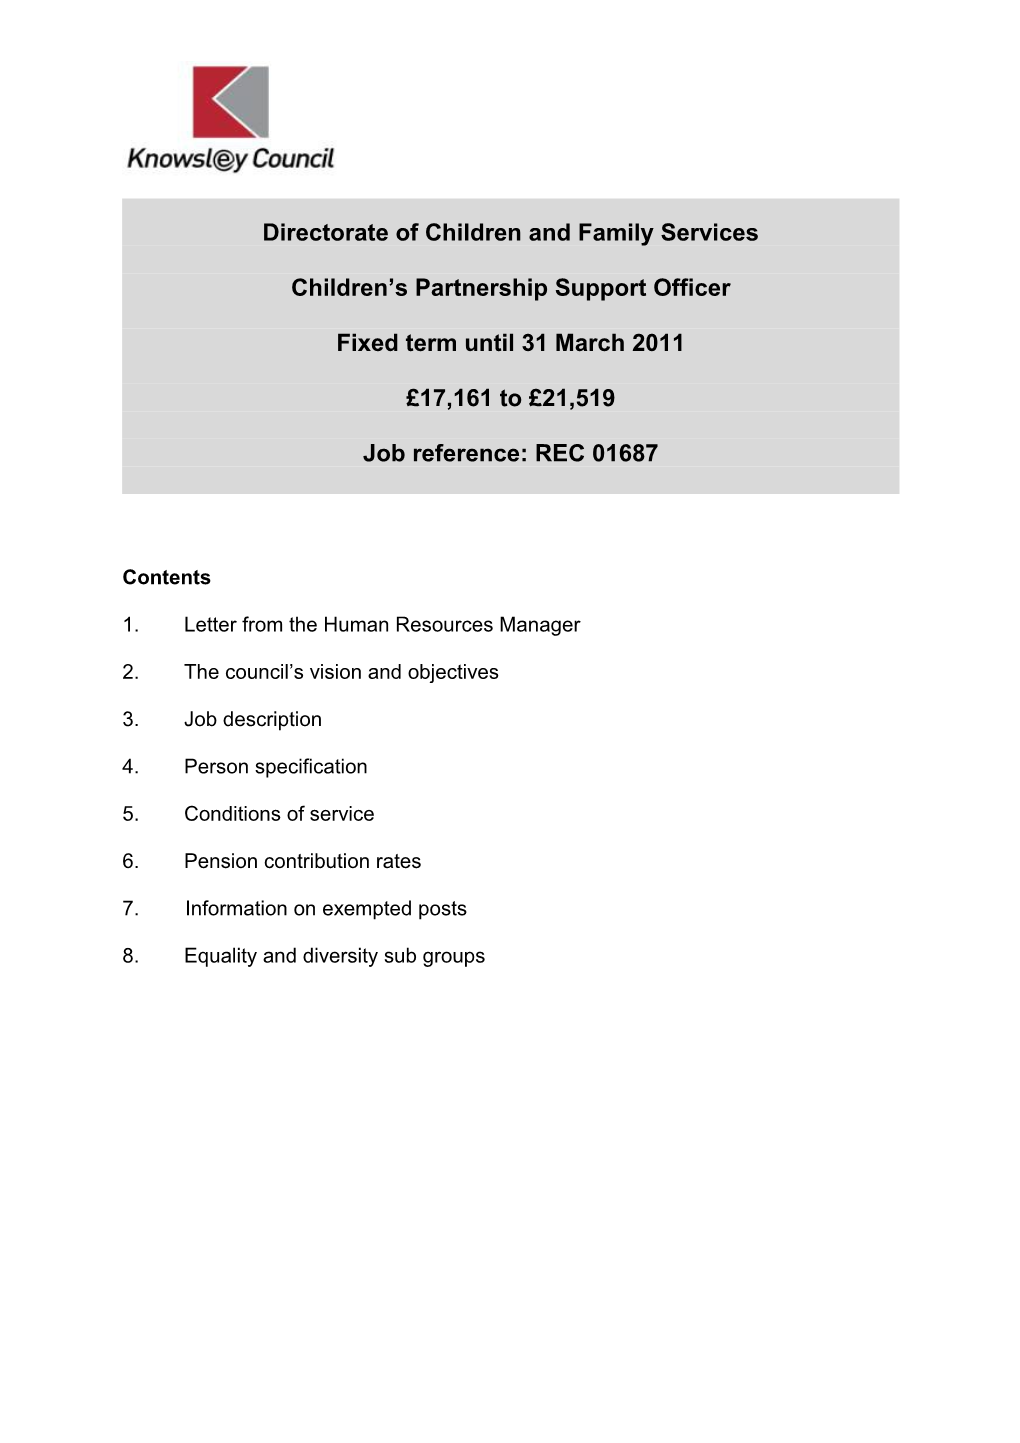 Directorate Ofchildren and Family Services